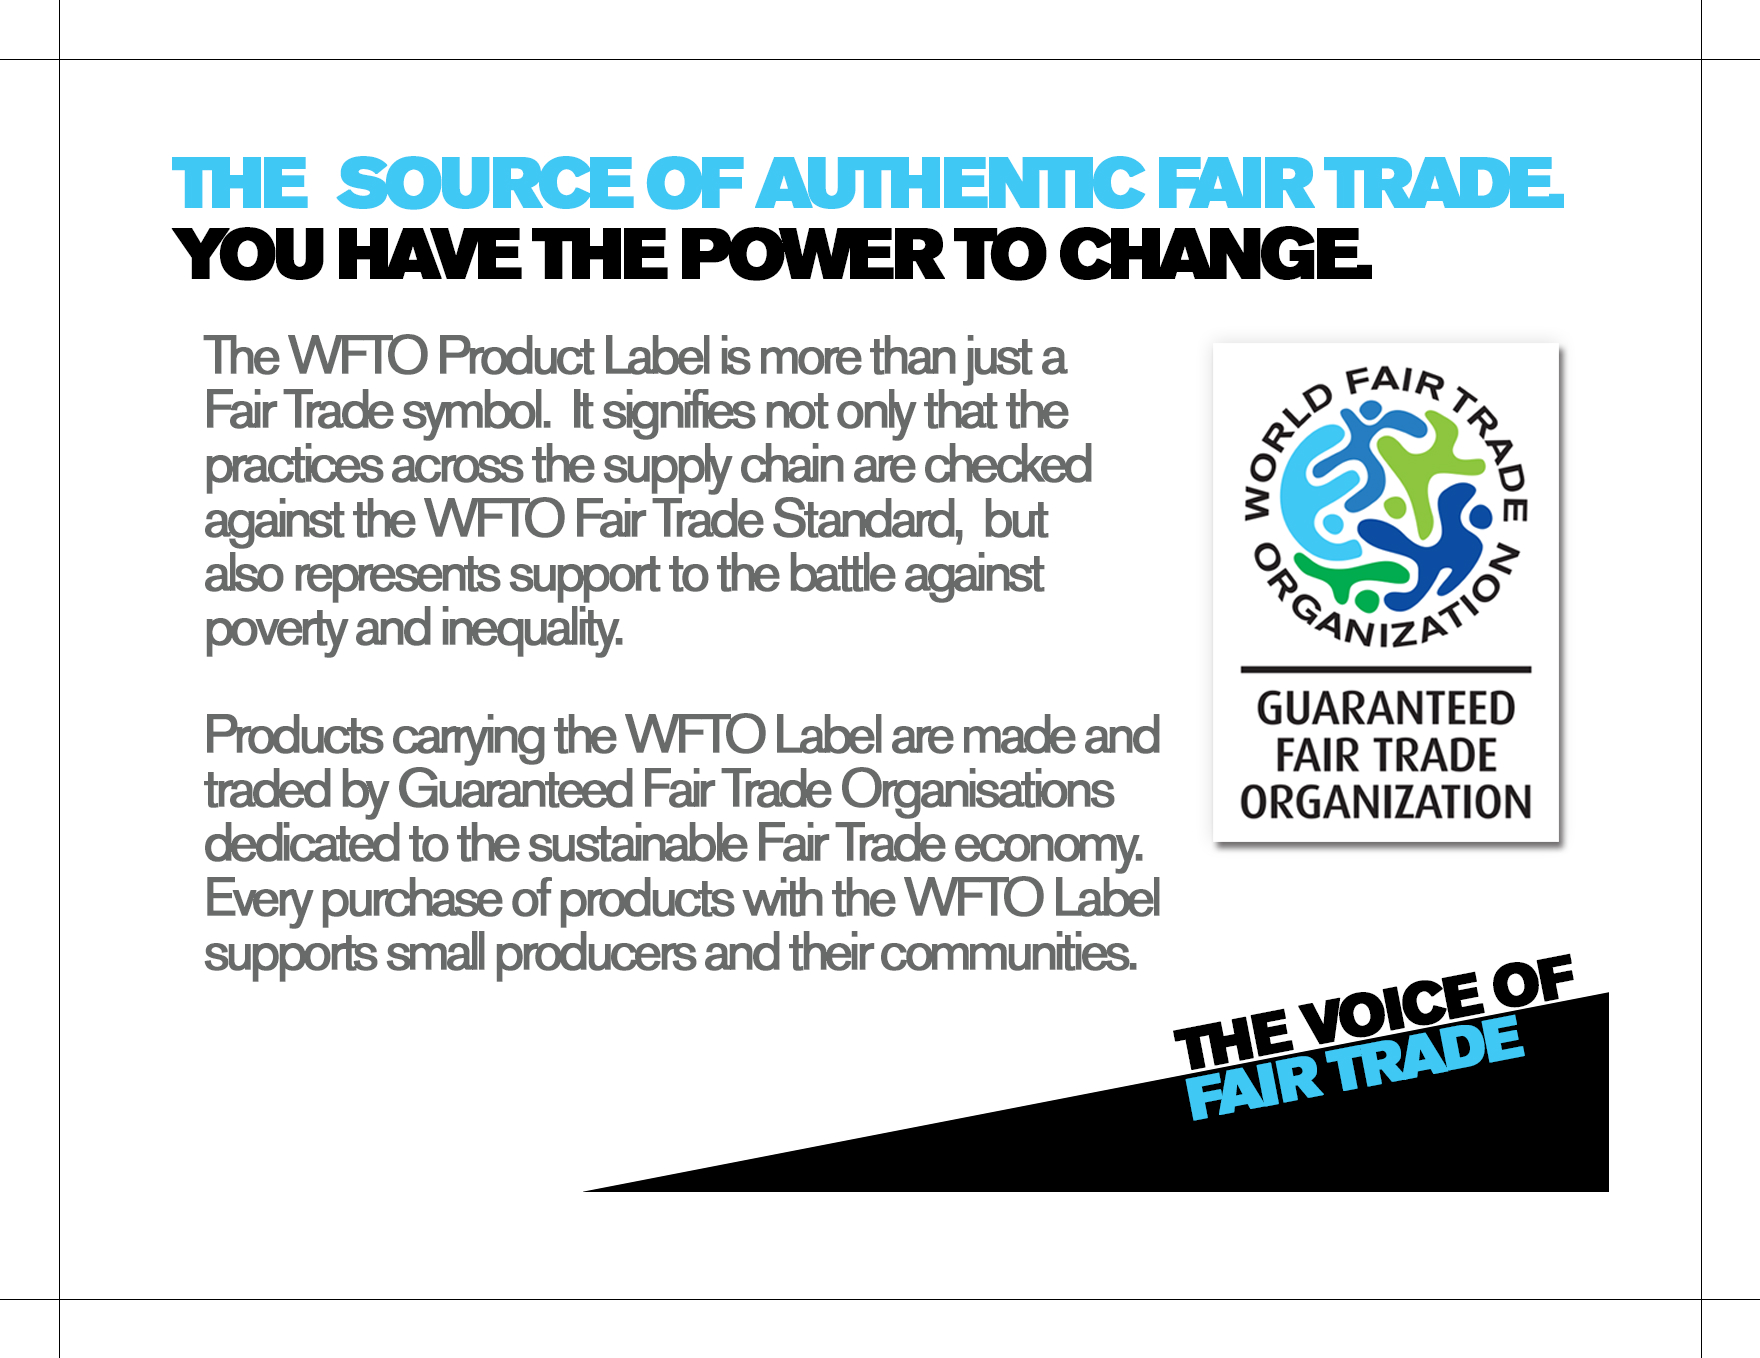 WFTO product label flyer 